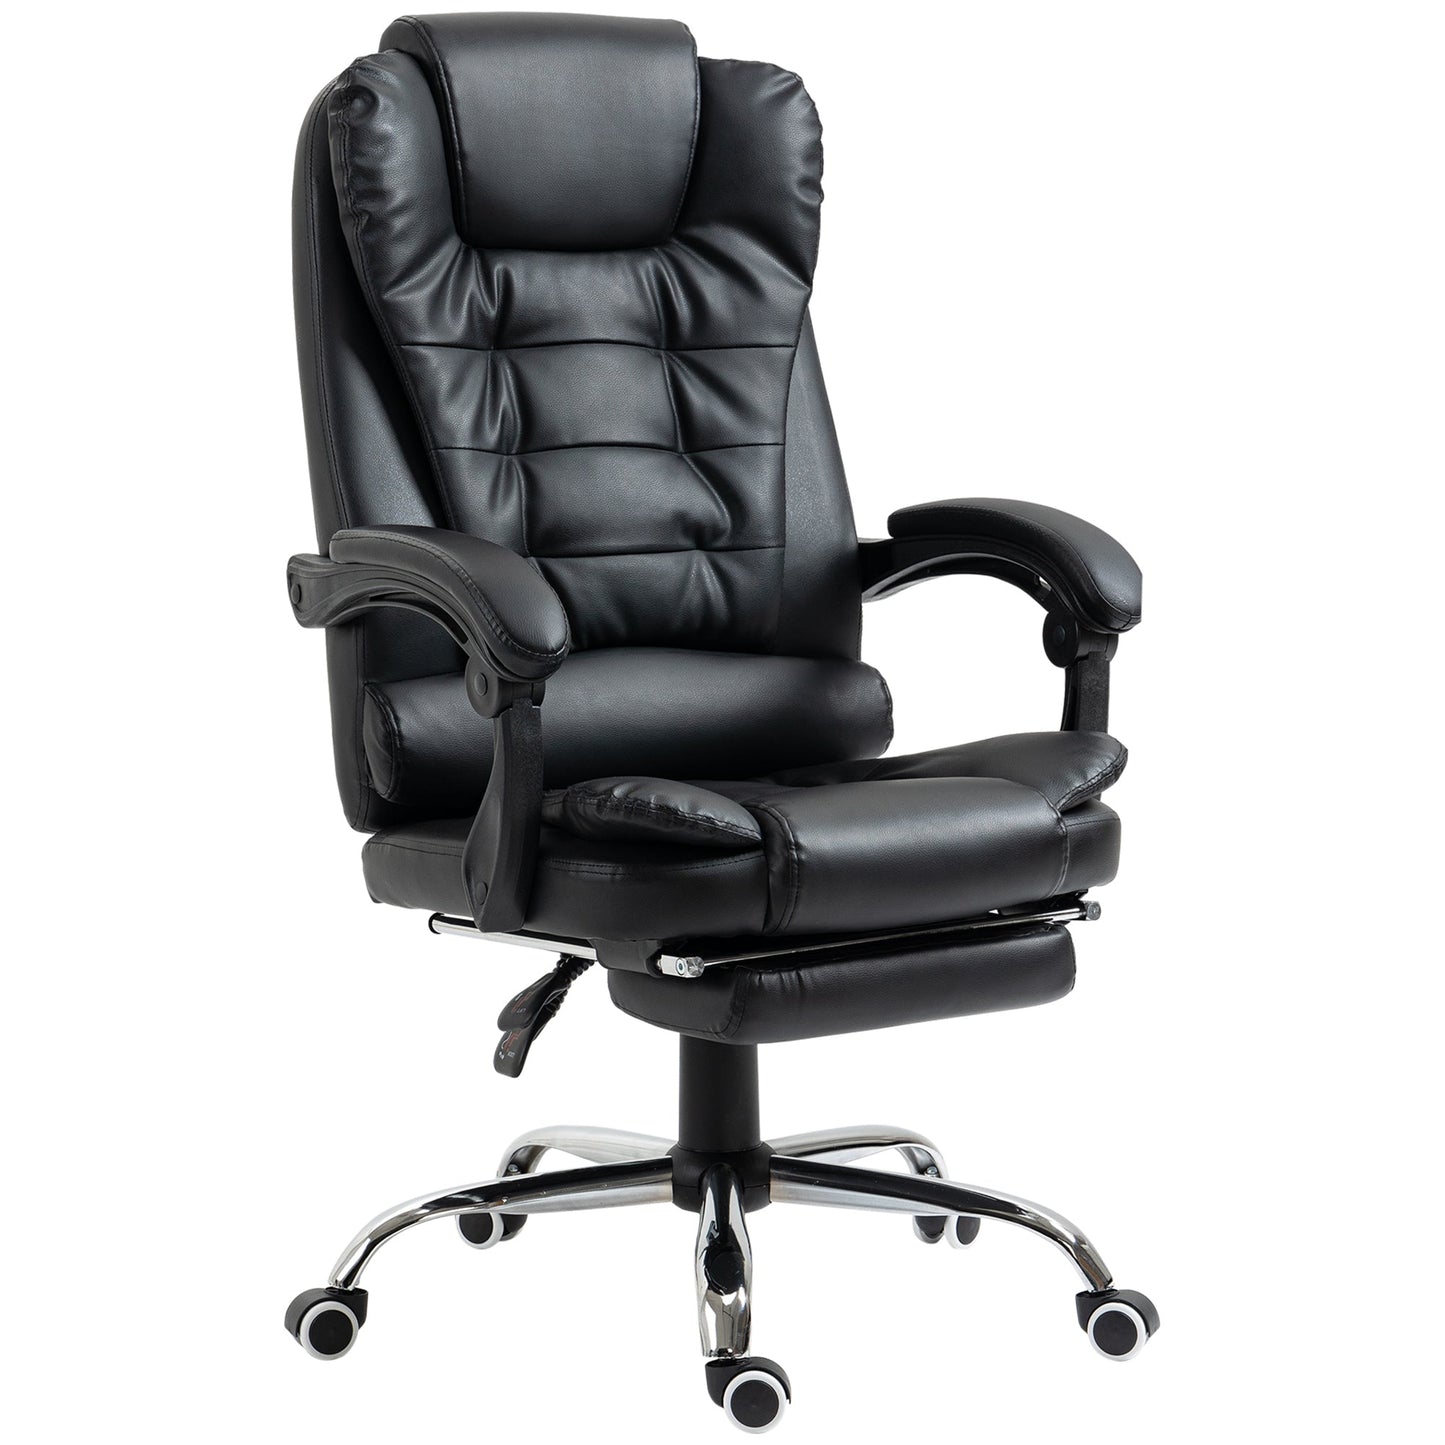 office chair at adjustable height with reclining back and footrest, 64.5x69x117-127 cm, black